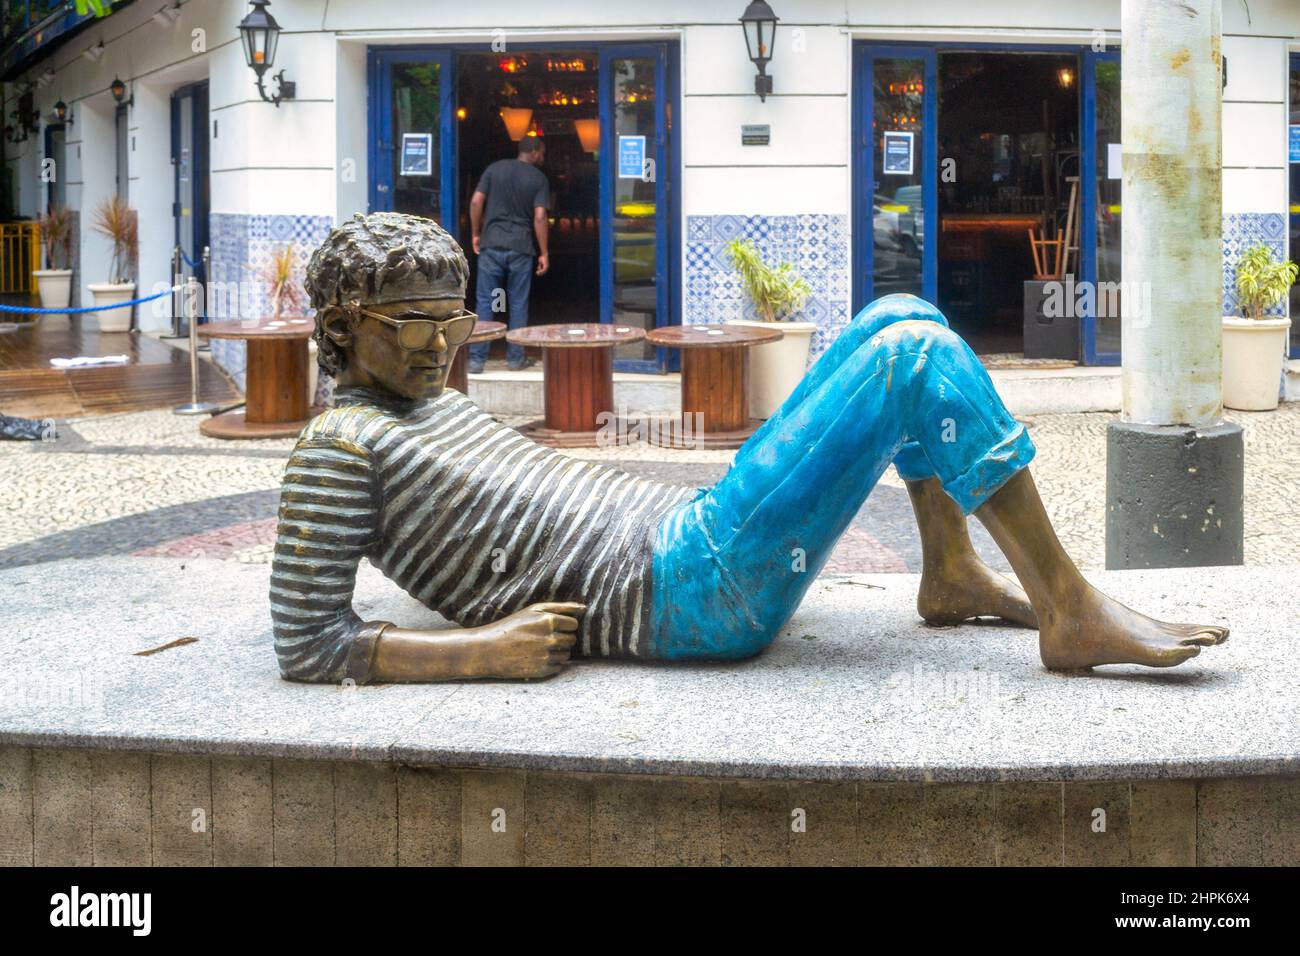 Sculpture of the composer and singer Cazuza. Ipanema Beach is a famous place and a major travel destination in the South American country. Stock Photo